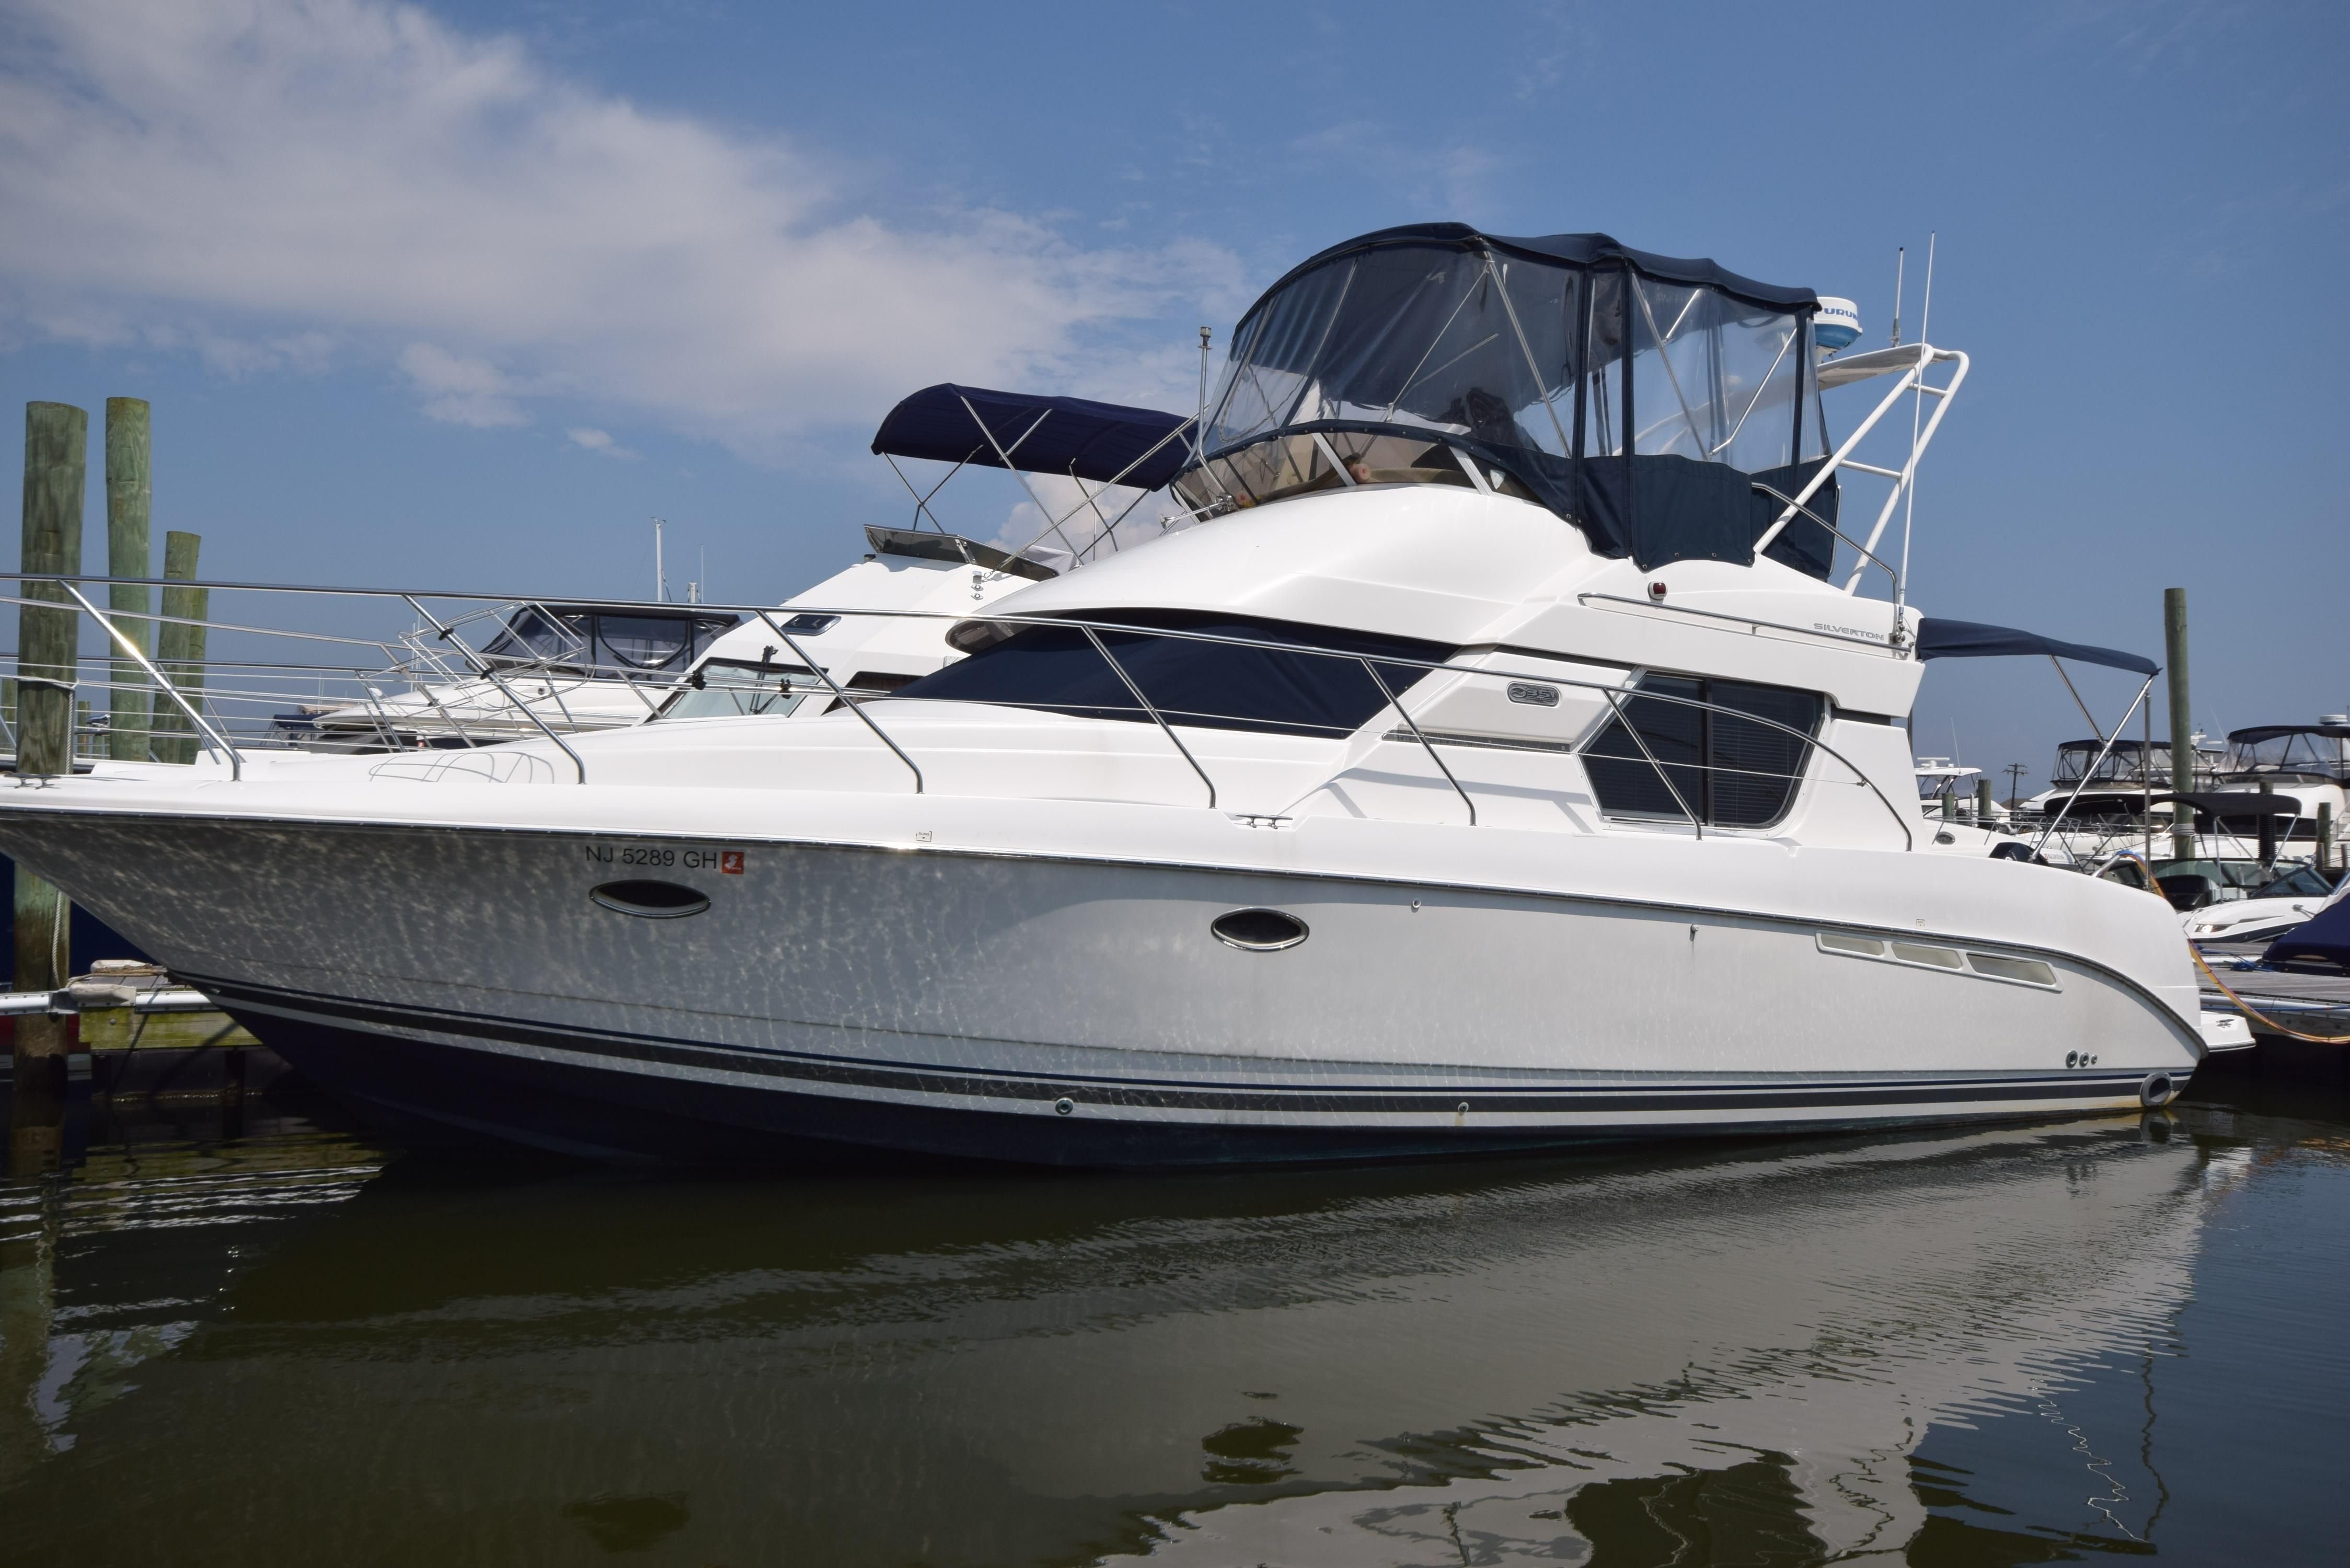 1999 Silverton 351 Power New and Used Boats for Sale - au.yachtworld.com